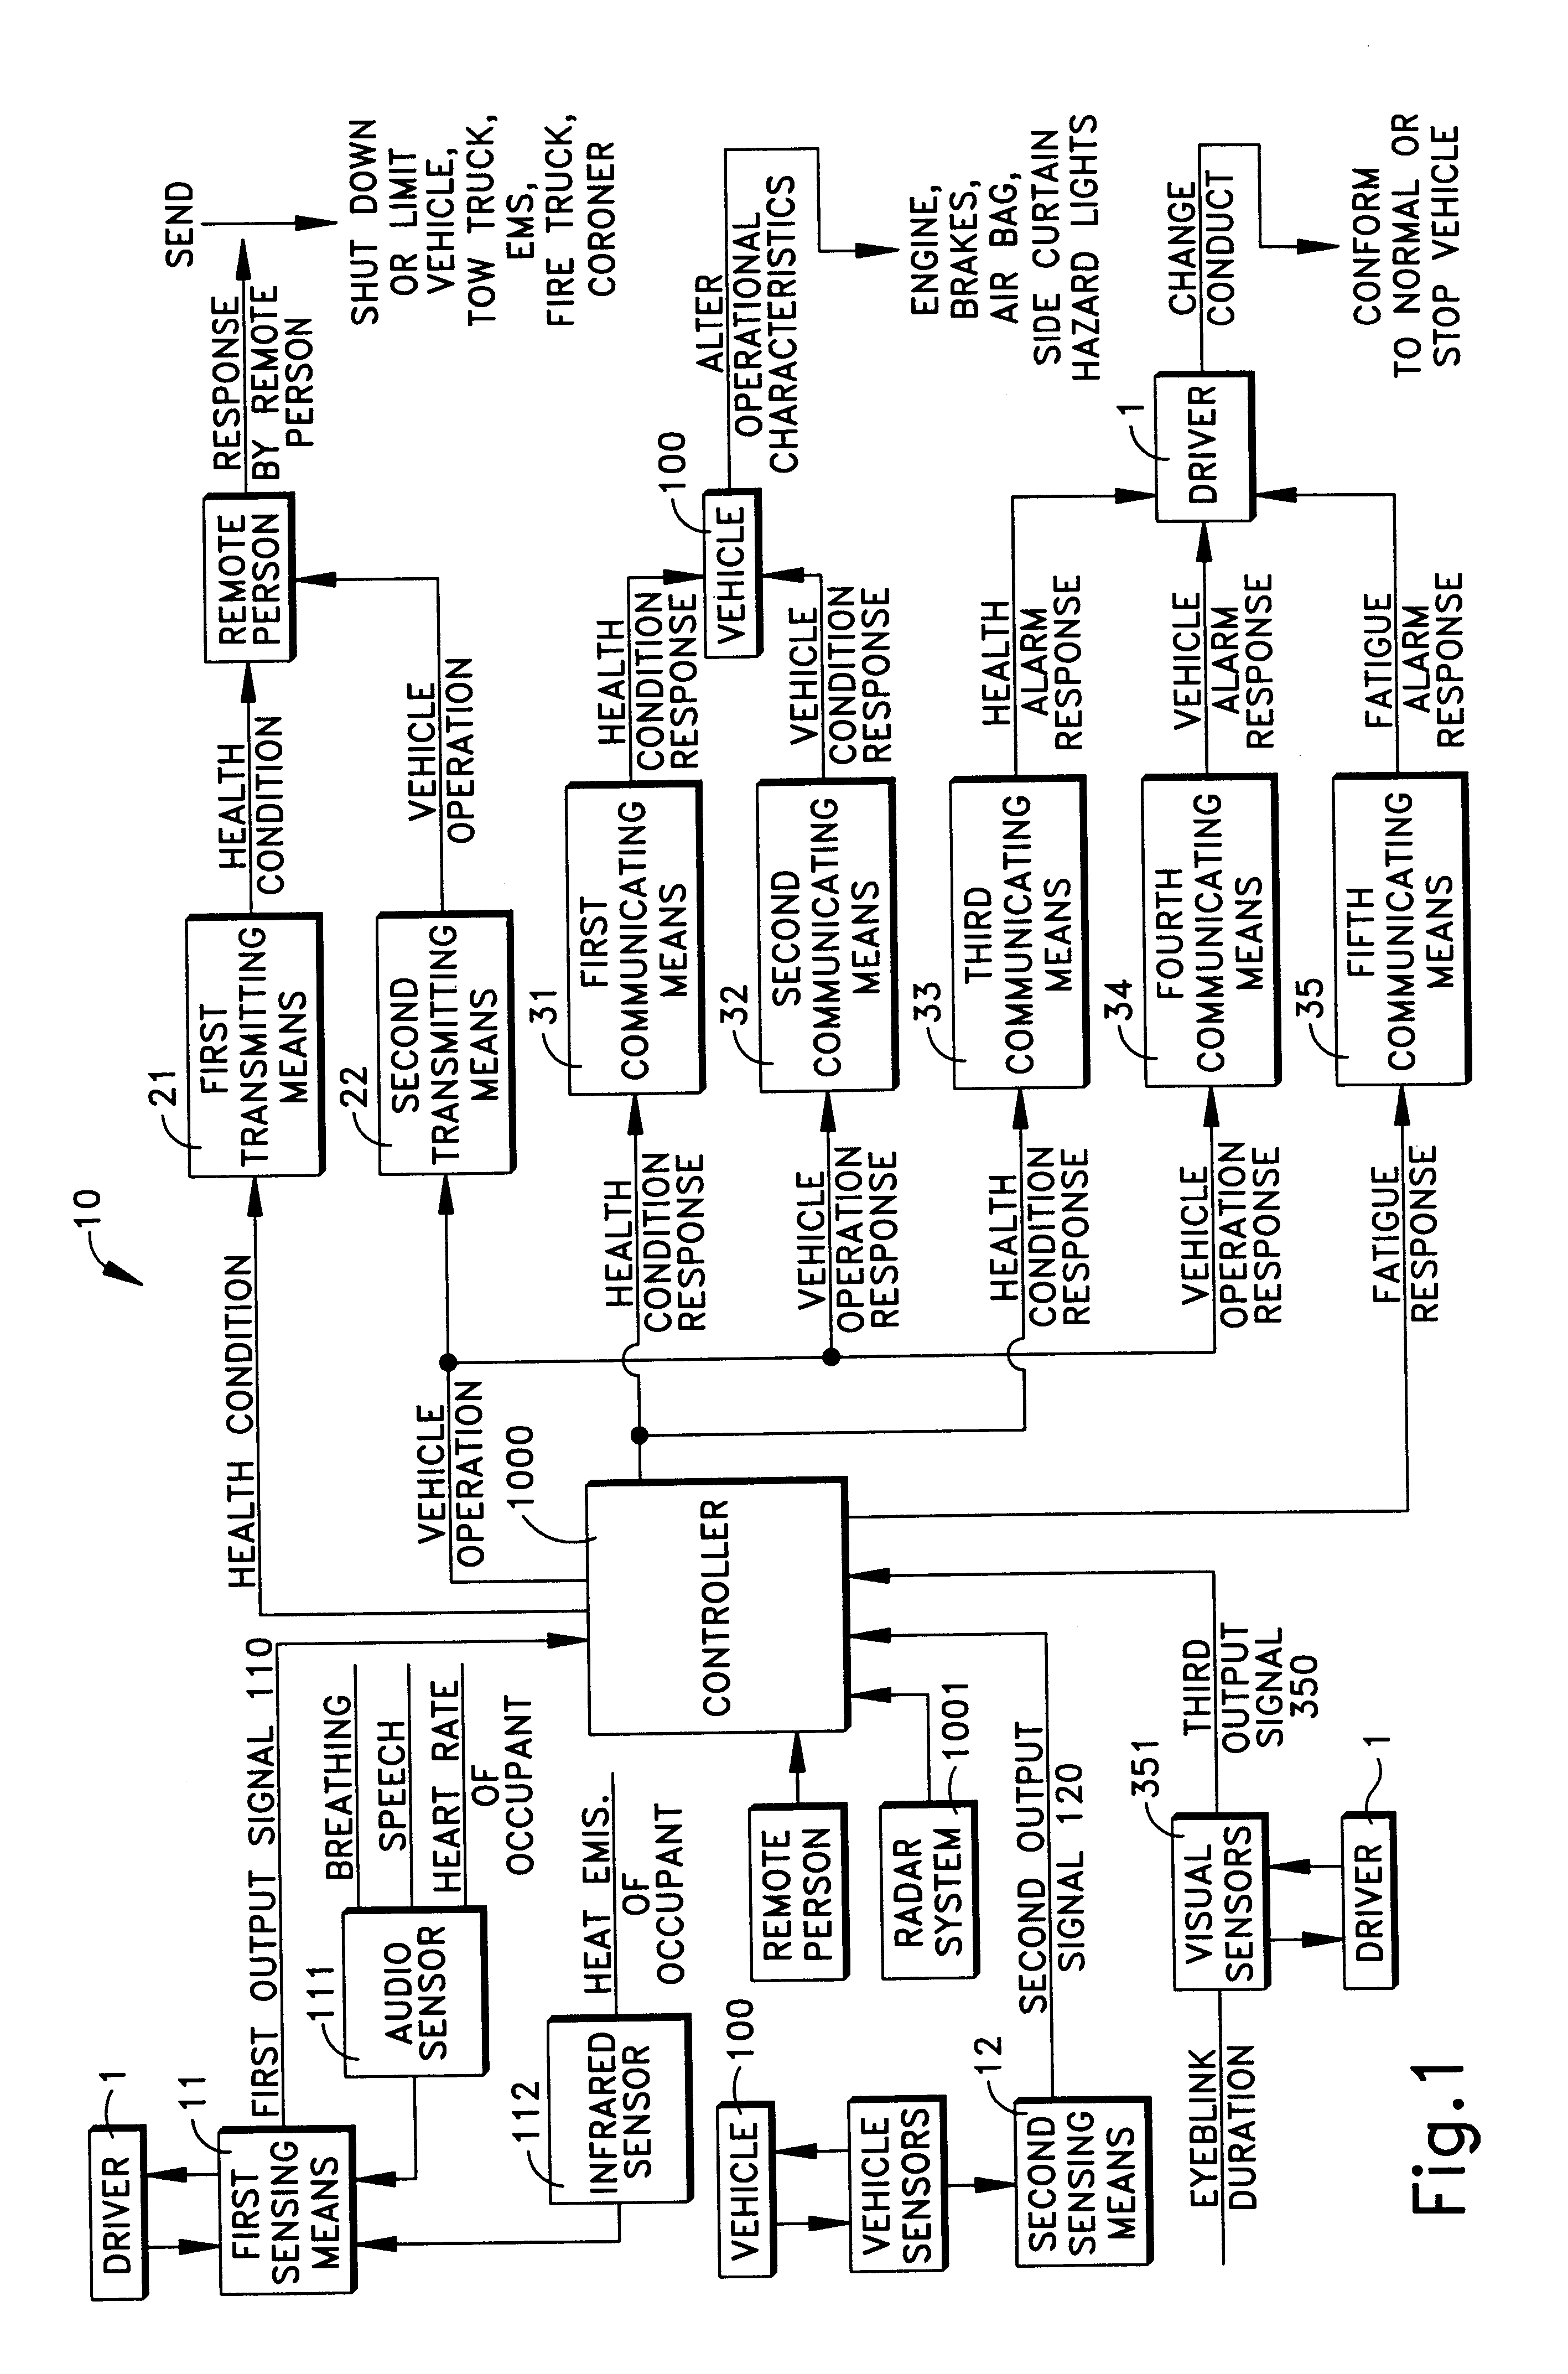 Apparatus and method for responding to the health and fitness of a driver of a vehicle